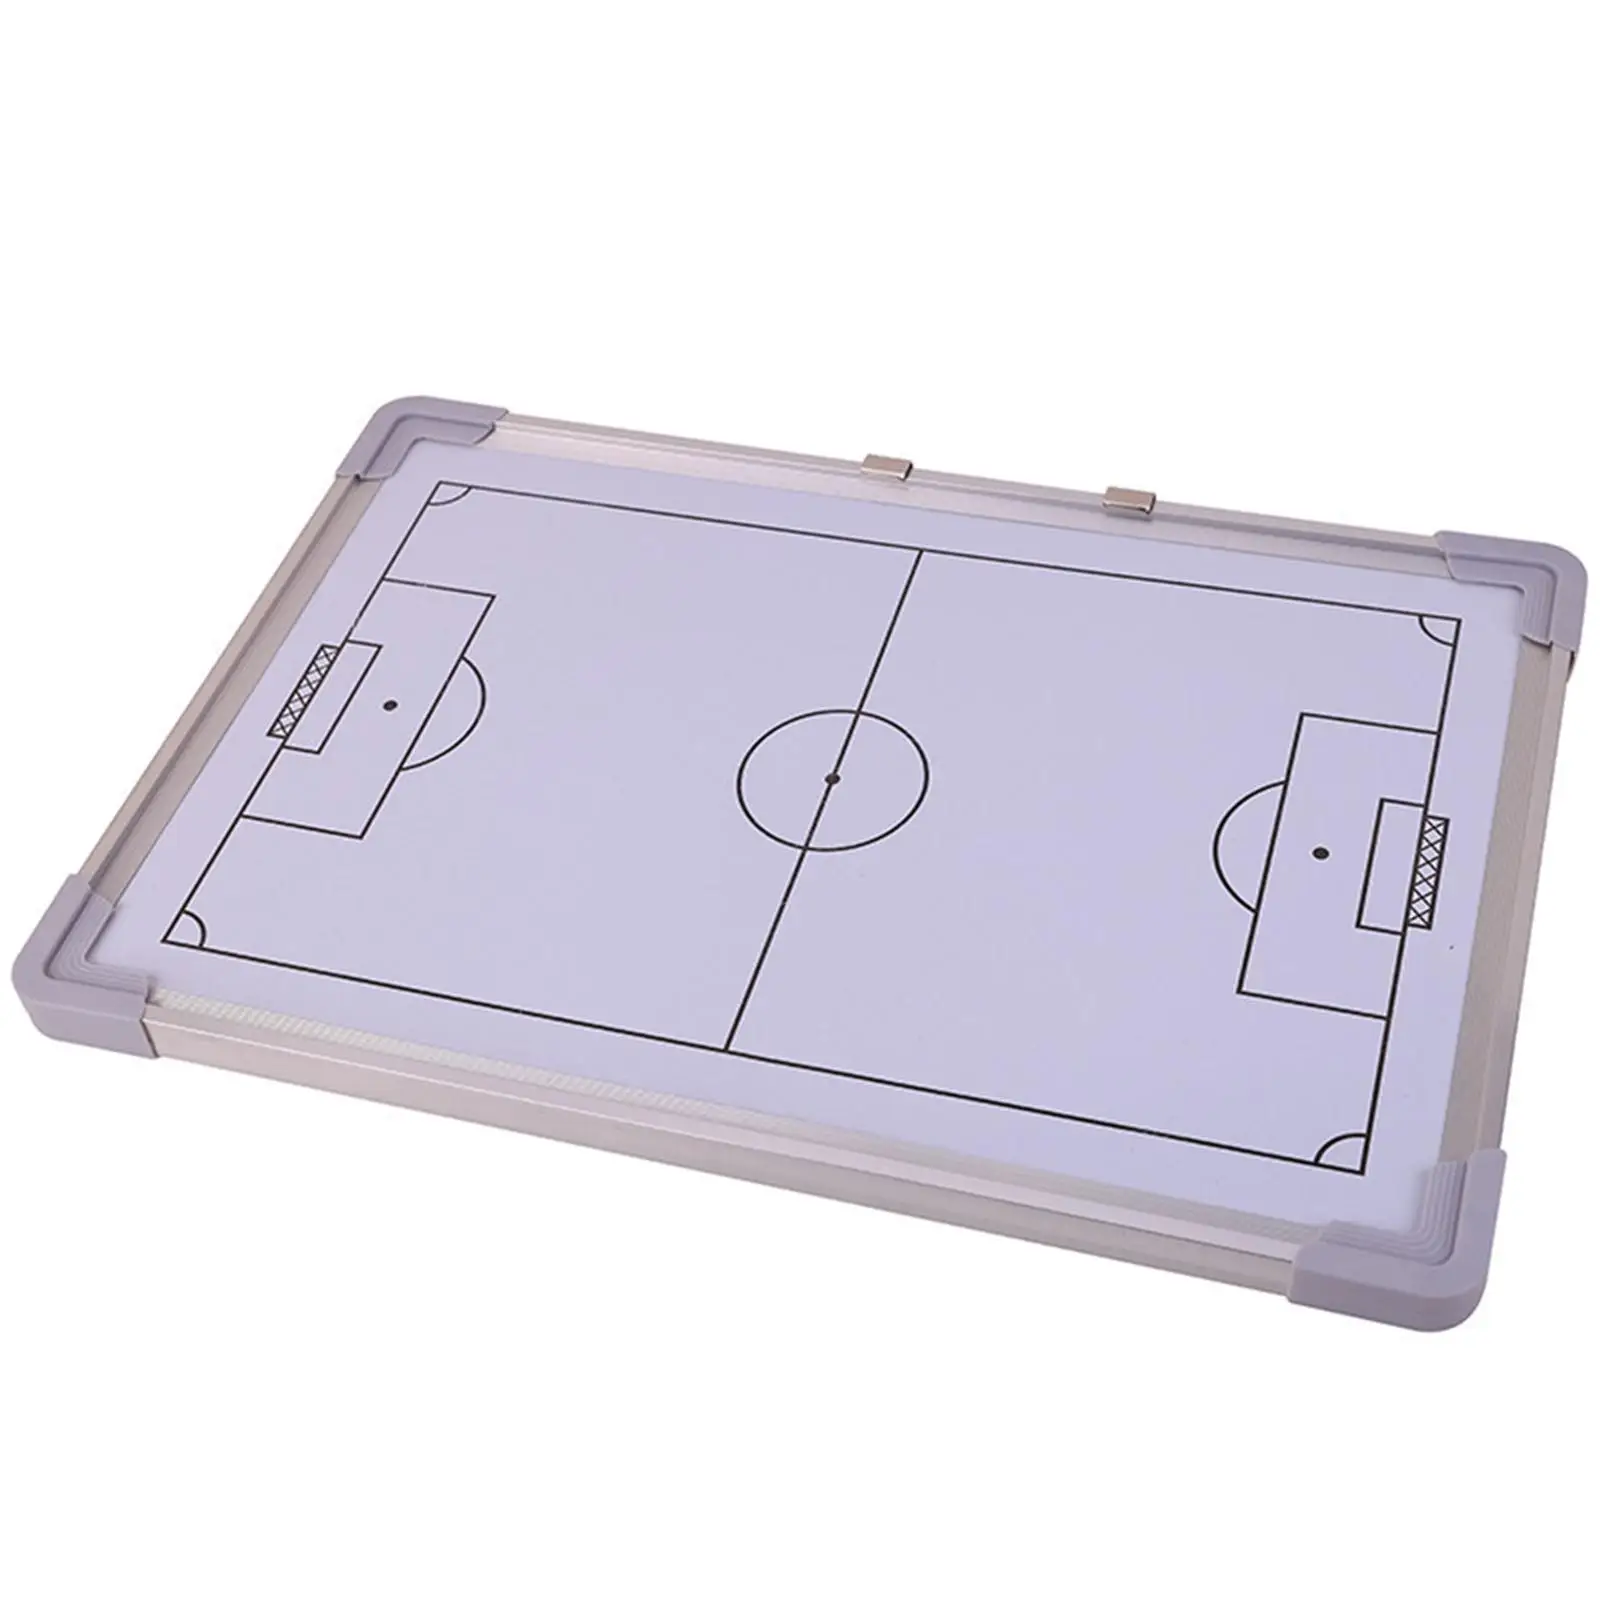 Basketball Football Coaching Board Magnetic Large With 27 Buttons Clear And Delicate Soccer Coaching Training Equipment For Kids